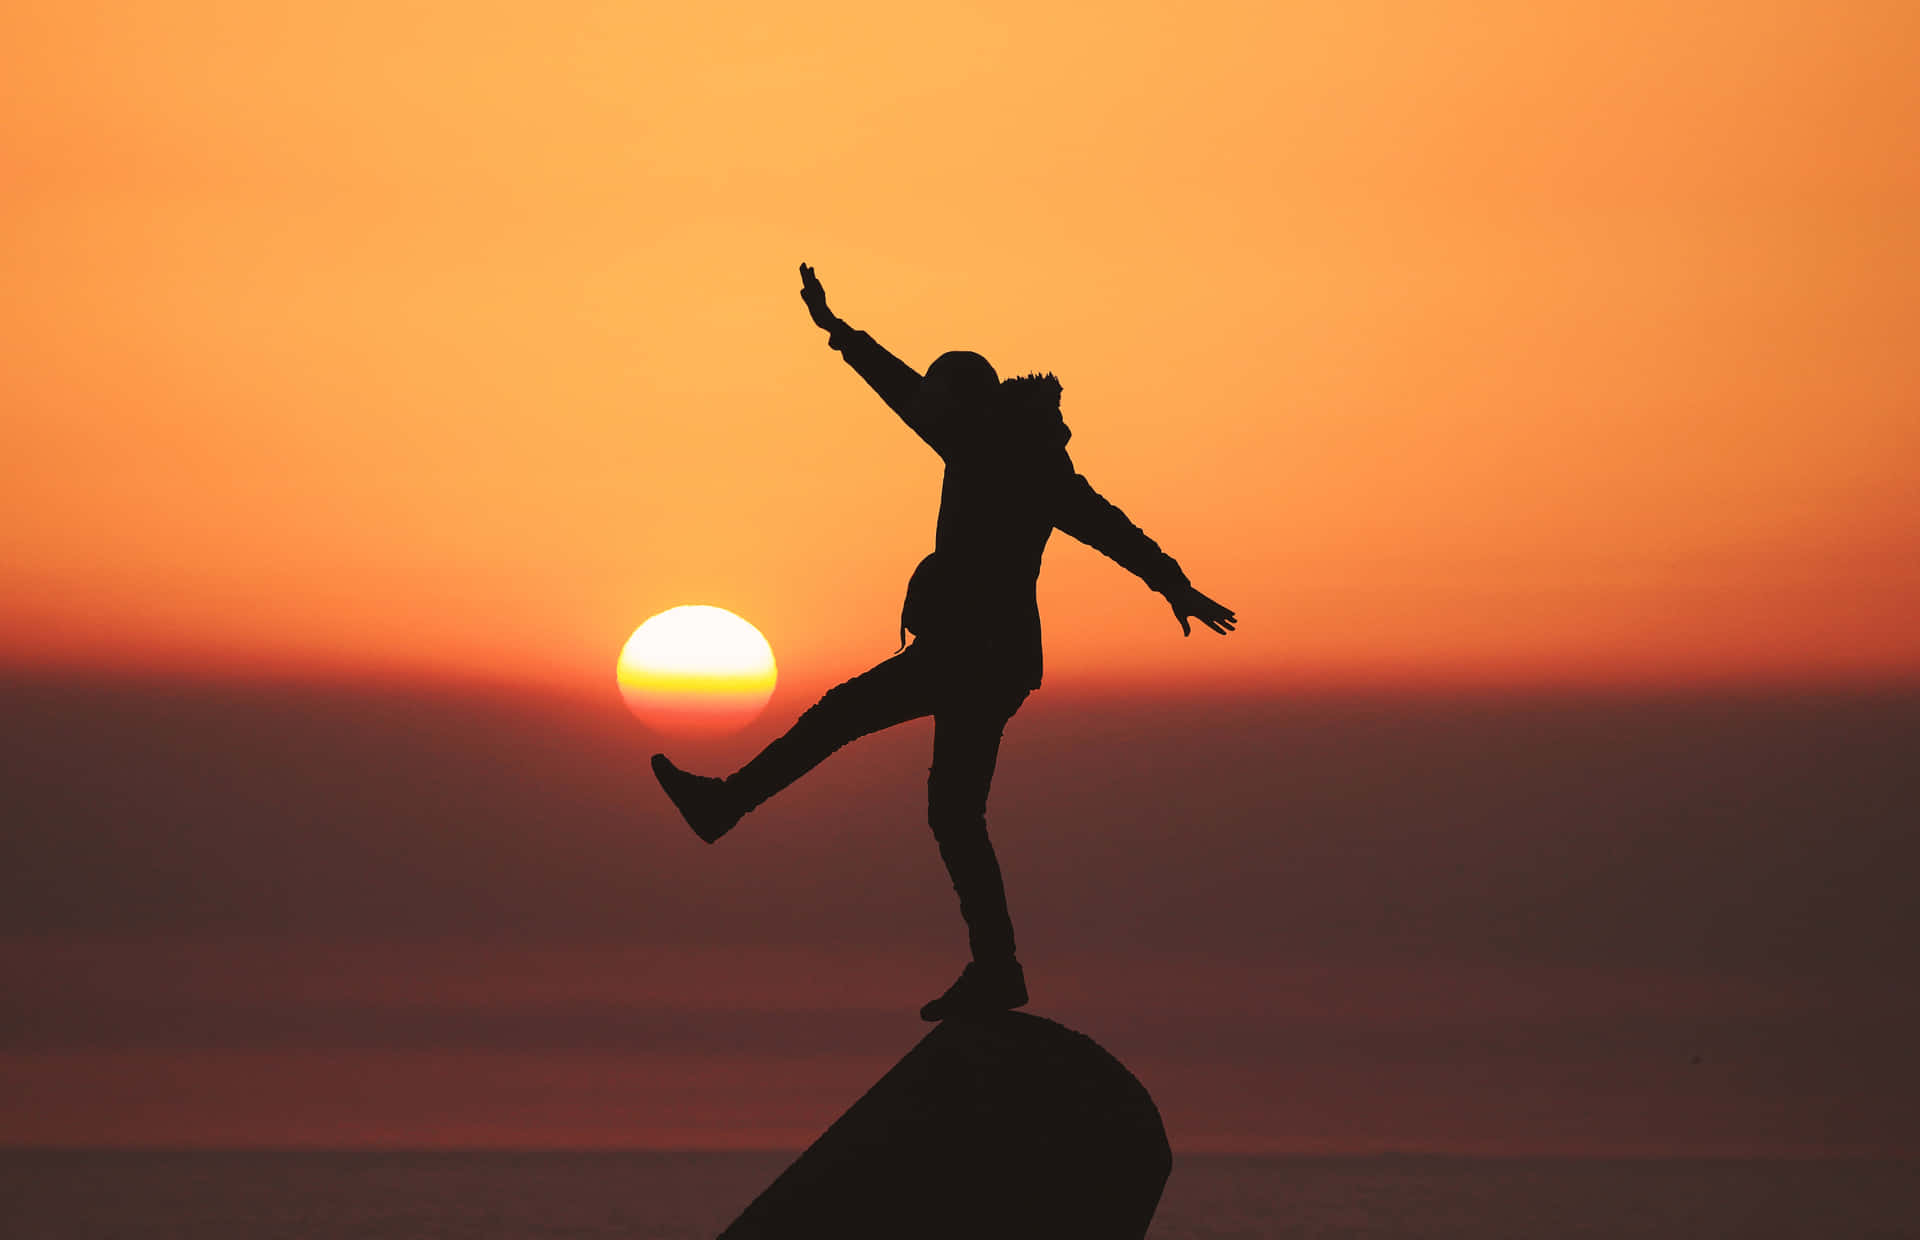 Silhouette Of A Person Jumping On A Rock